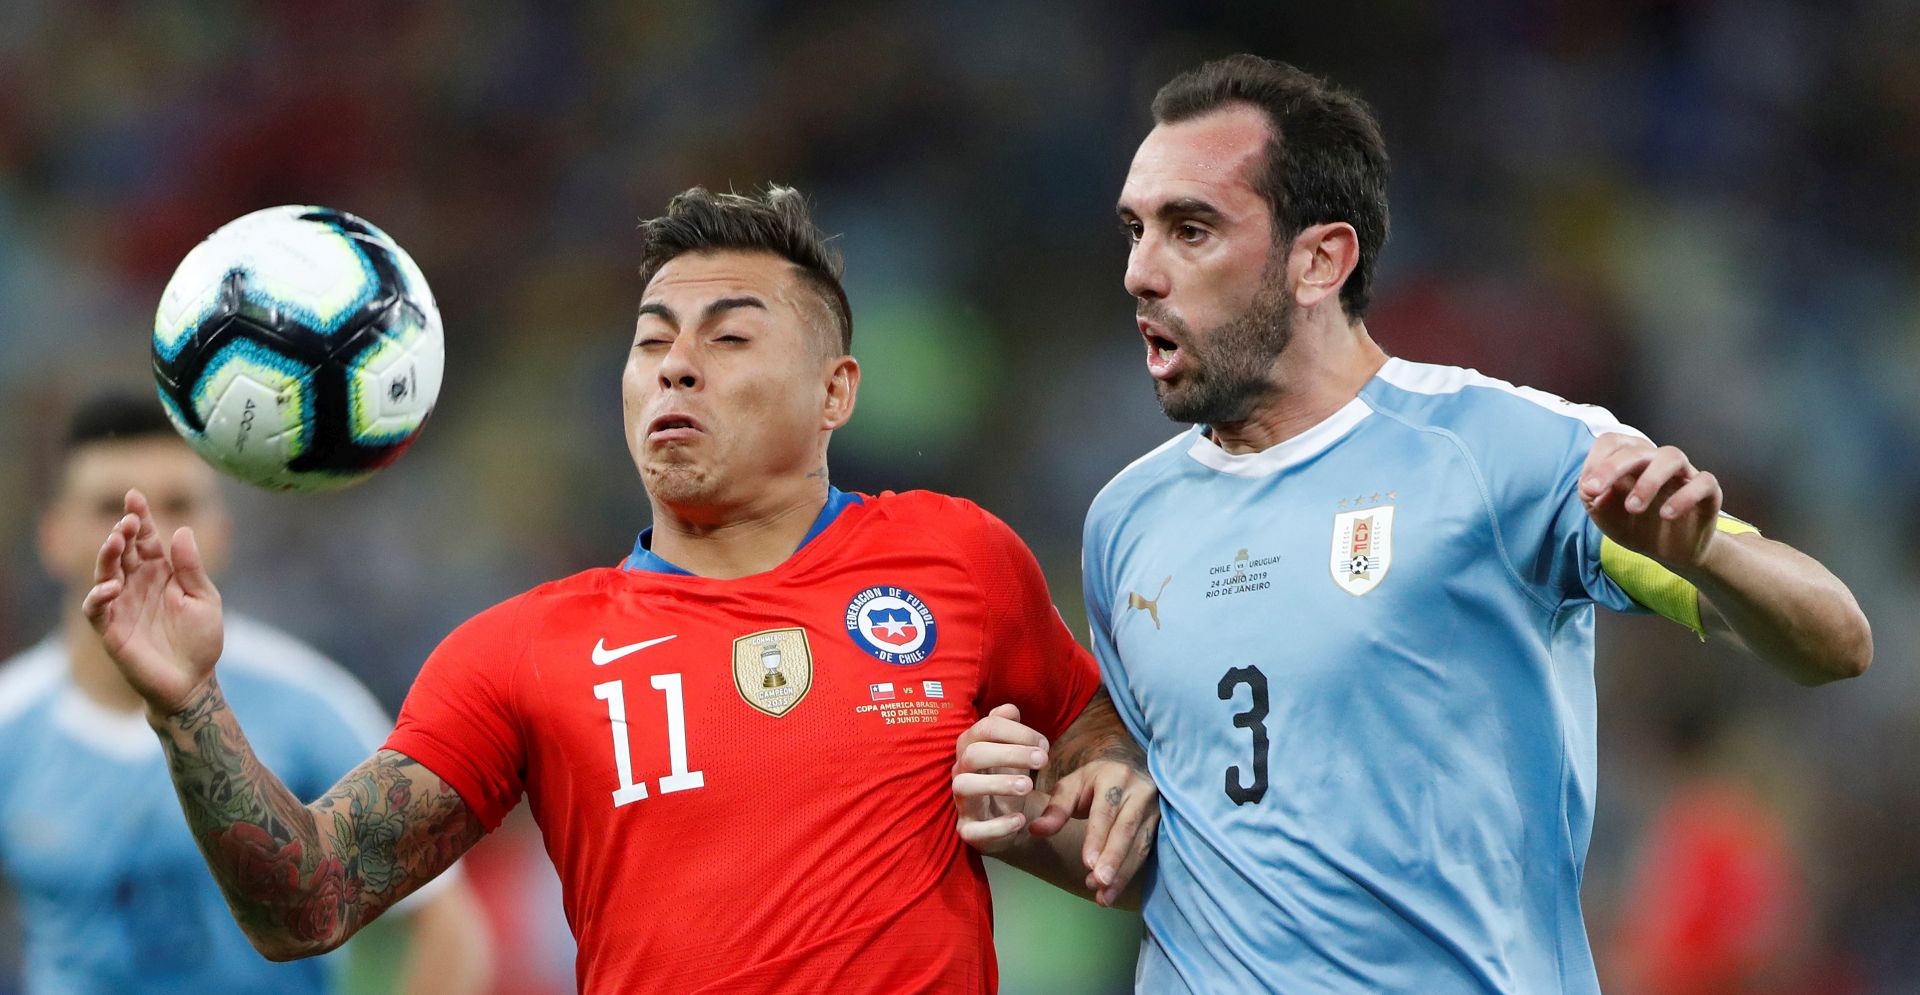 epa07671788 Diego Godin (R) of Uruguay in action against Eduardo Vargas (L) of Chile during the Copa America 2019 Group C soccer match between Chile and Uruguay, at the Maracana Stadium in Rio de Janeiro, Brazil, 24 June 2019.  EPA/FERNANDO MAIA